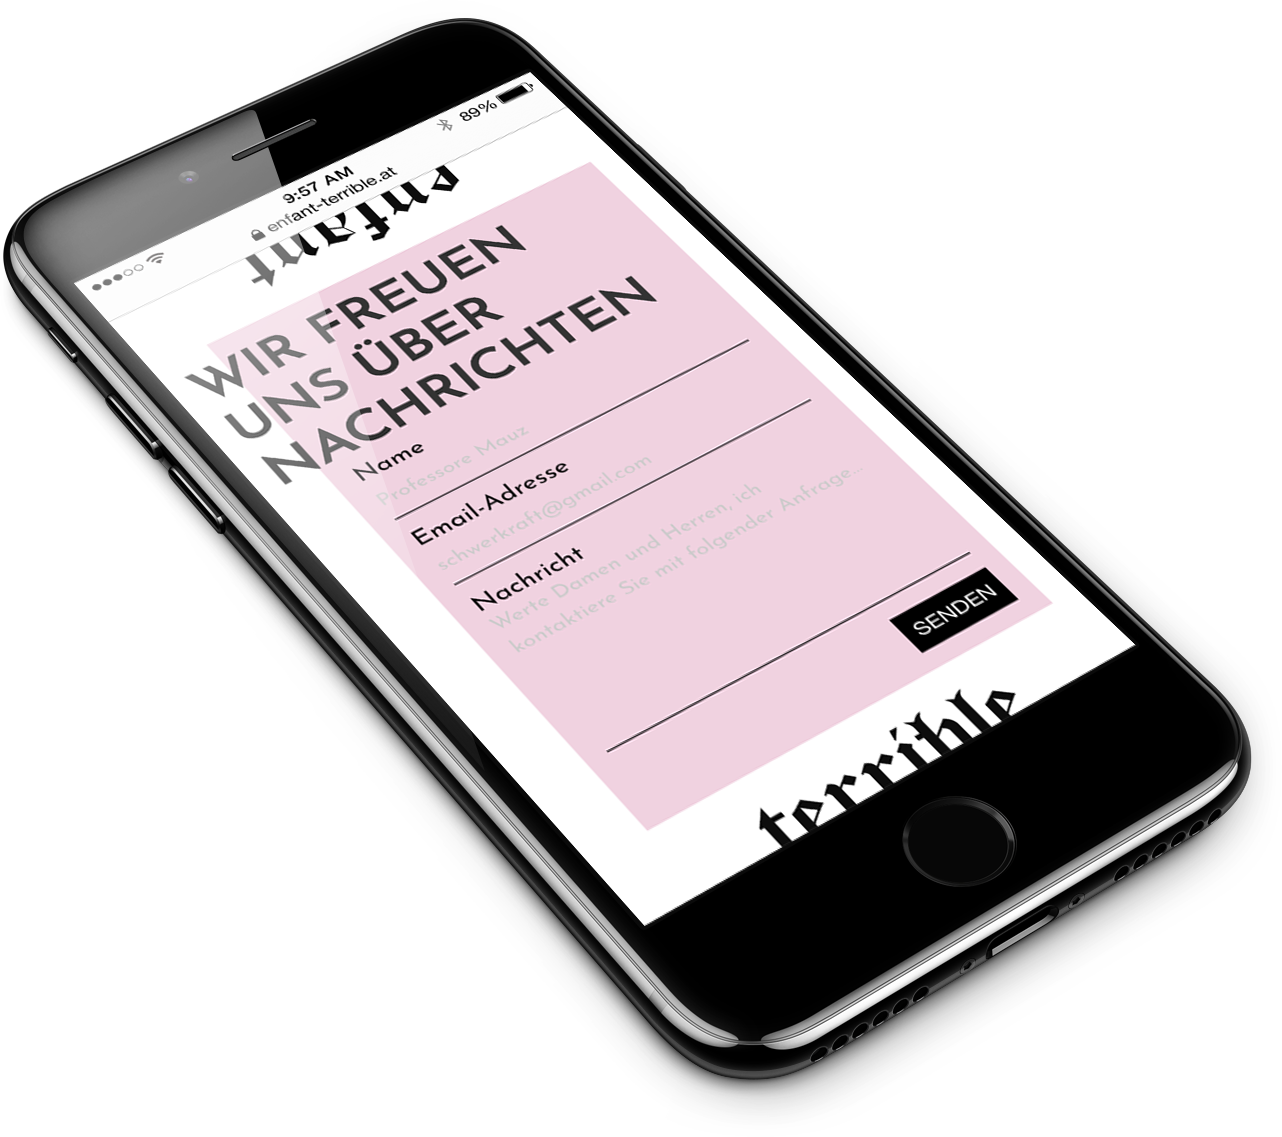 The mobile enfant terrible site: contact form